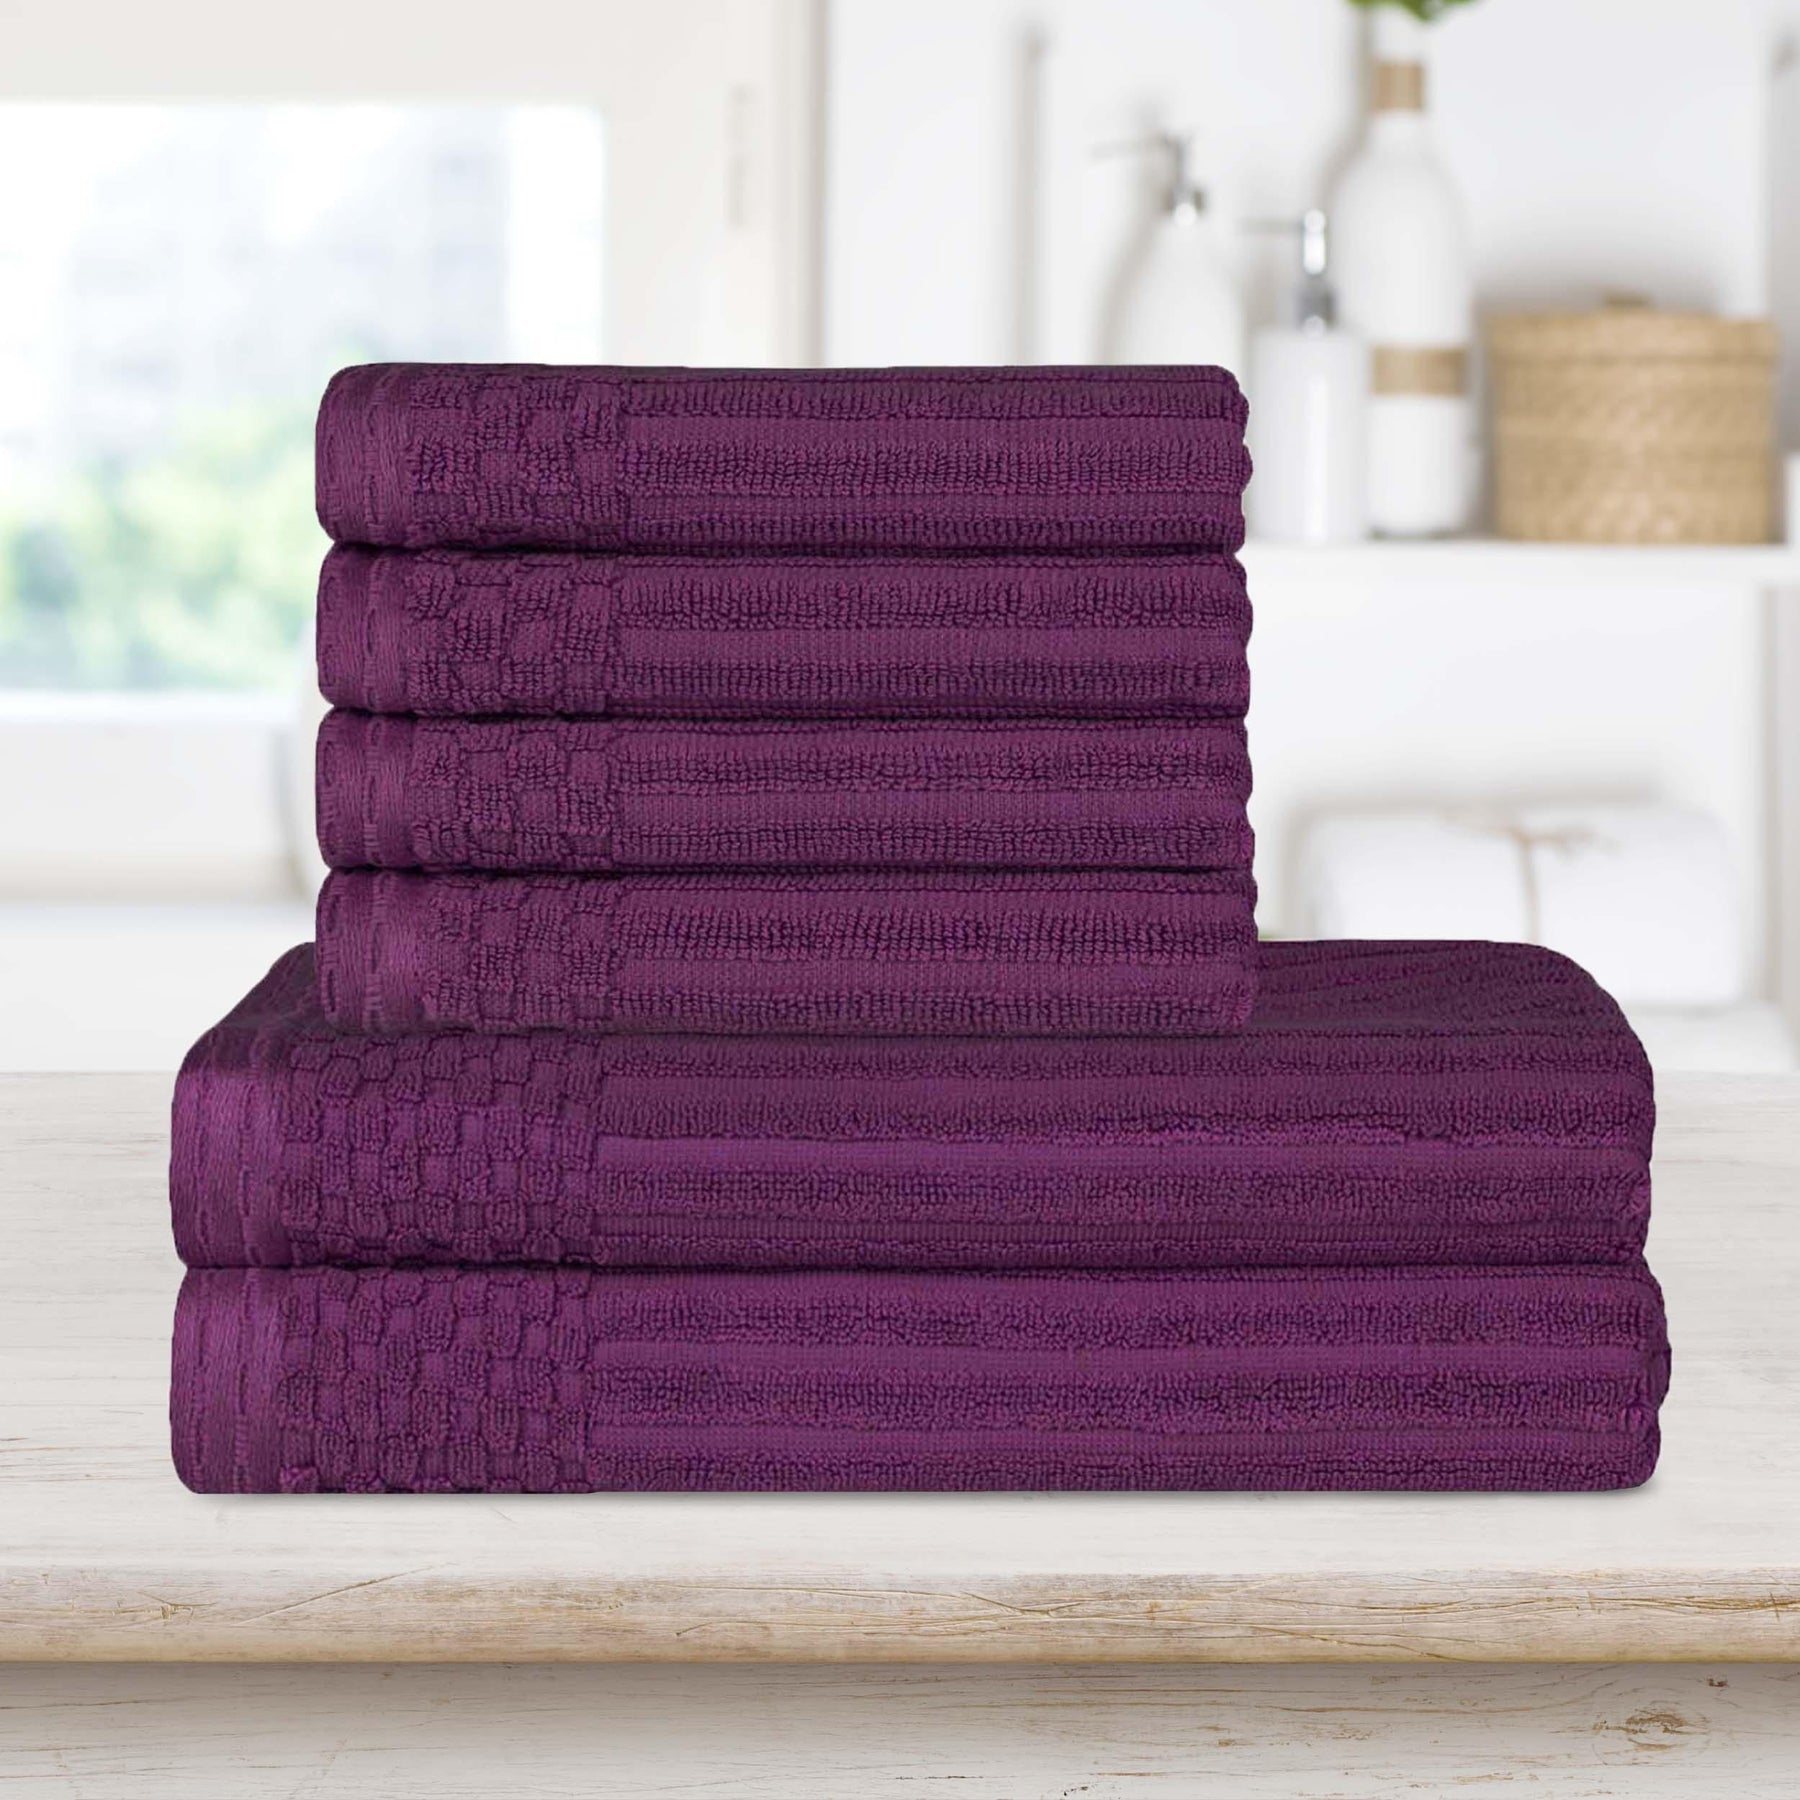  Superior Soho Ribbed Textured Cotton Ultra-Absorbent Hand and Bath Towel Set - Plum